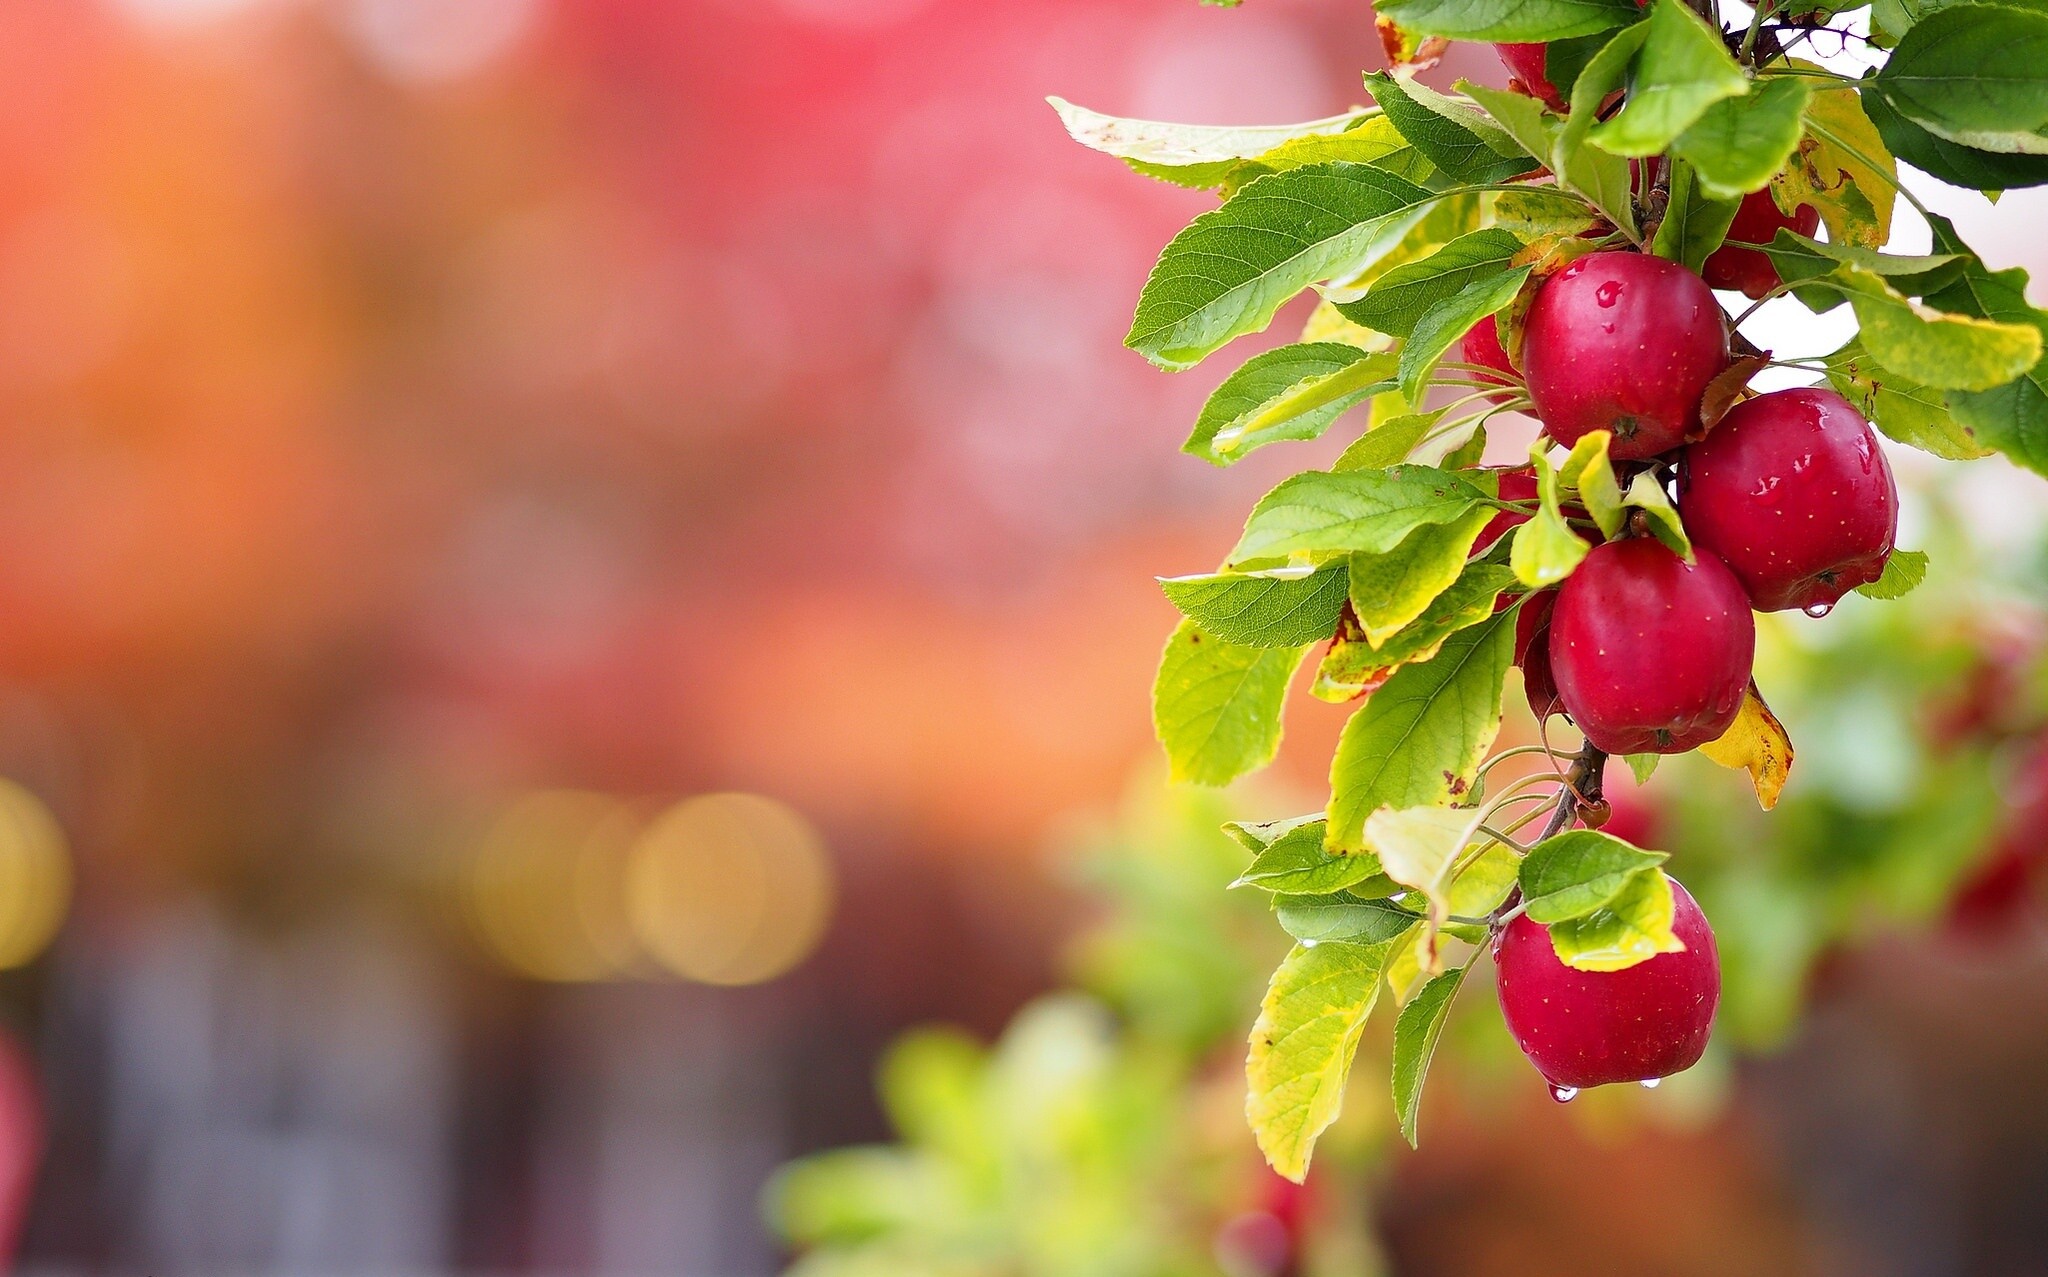 Apple tree wallpapers, Fruits of nature, Delicate blossoms, Nature's bounty, 2050x1280 HD Desktop